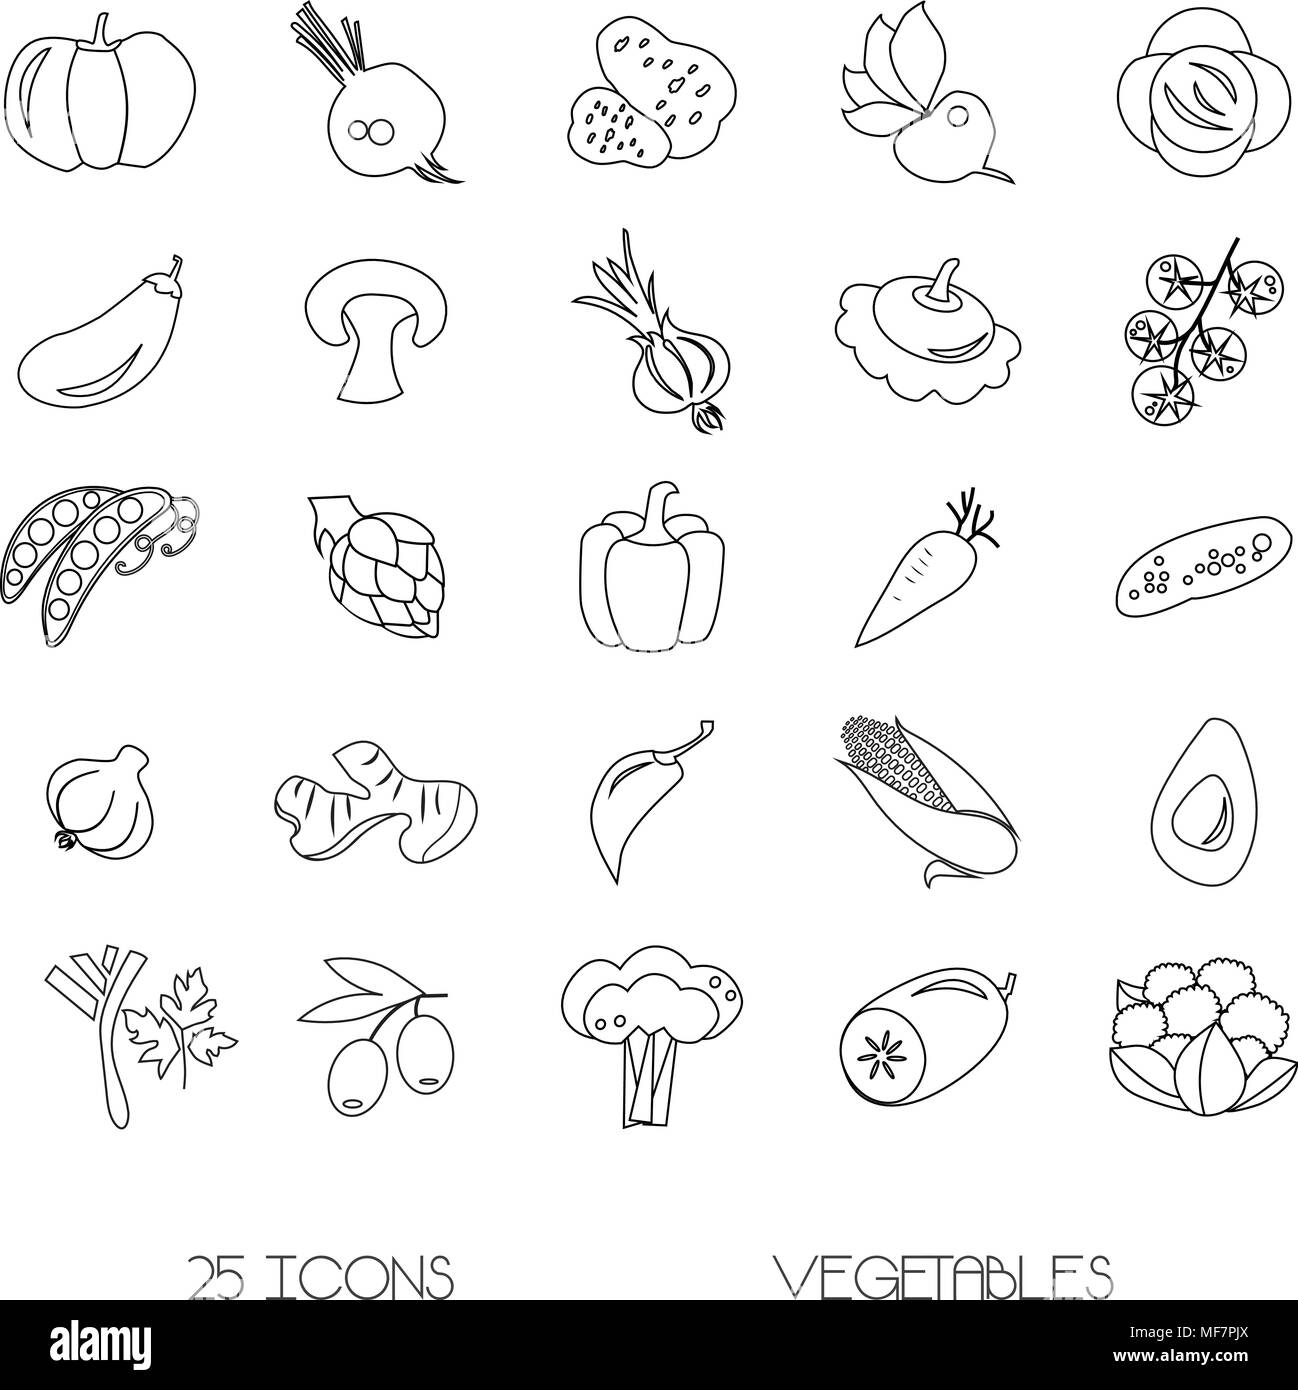 25 icons. basic set of vector icons of vegetables Stock Vector